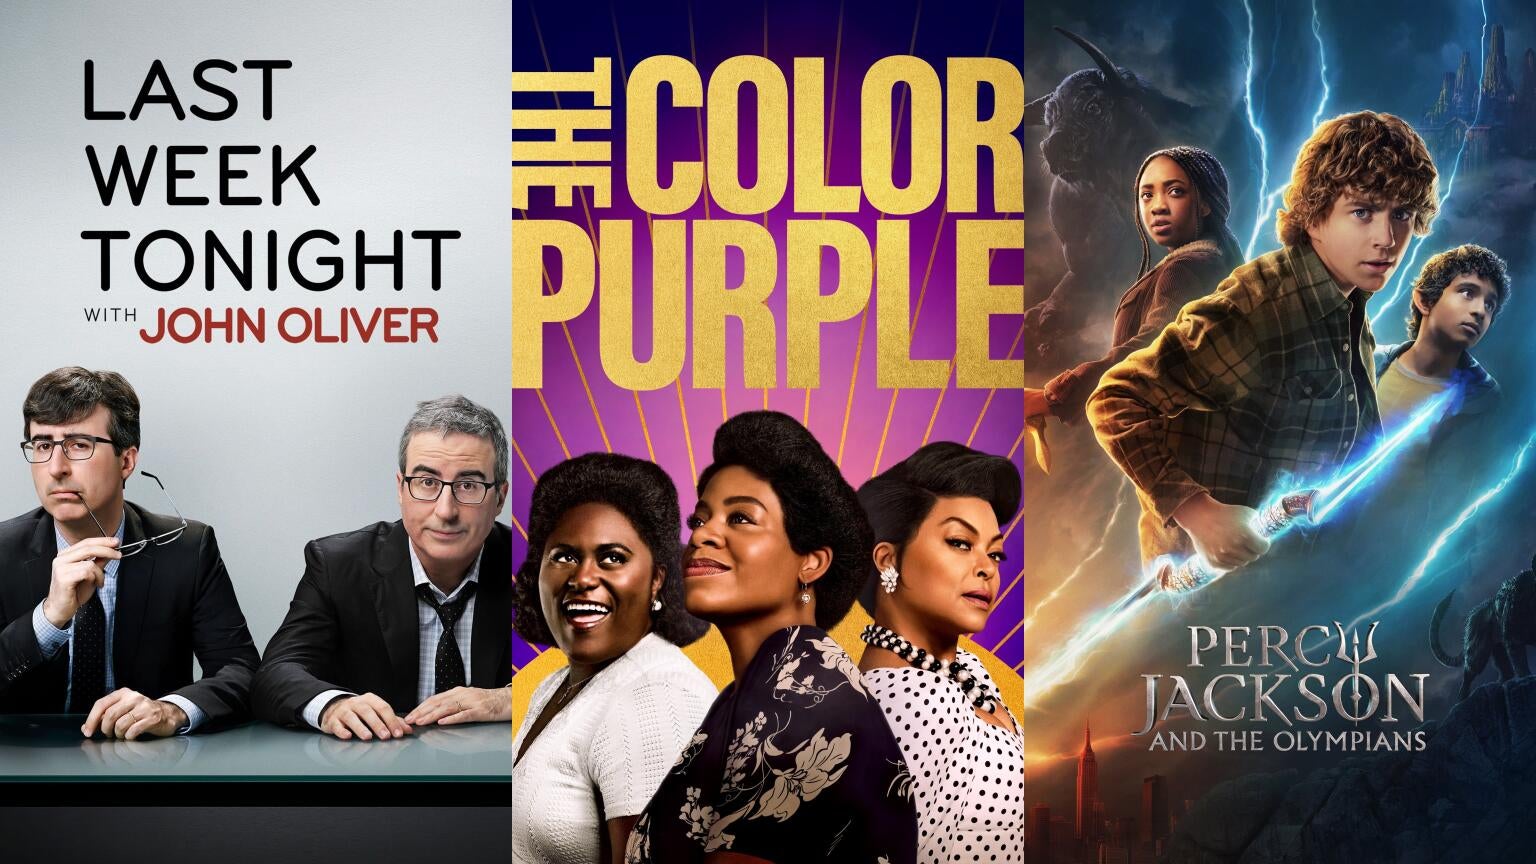 Posters for "Last Week Tonight With John Oliver," "The Color Purple," and "Percy Jackson and the Olympians"